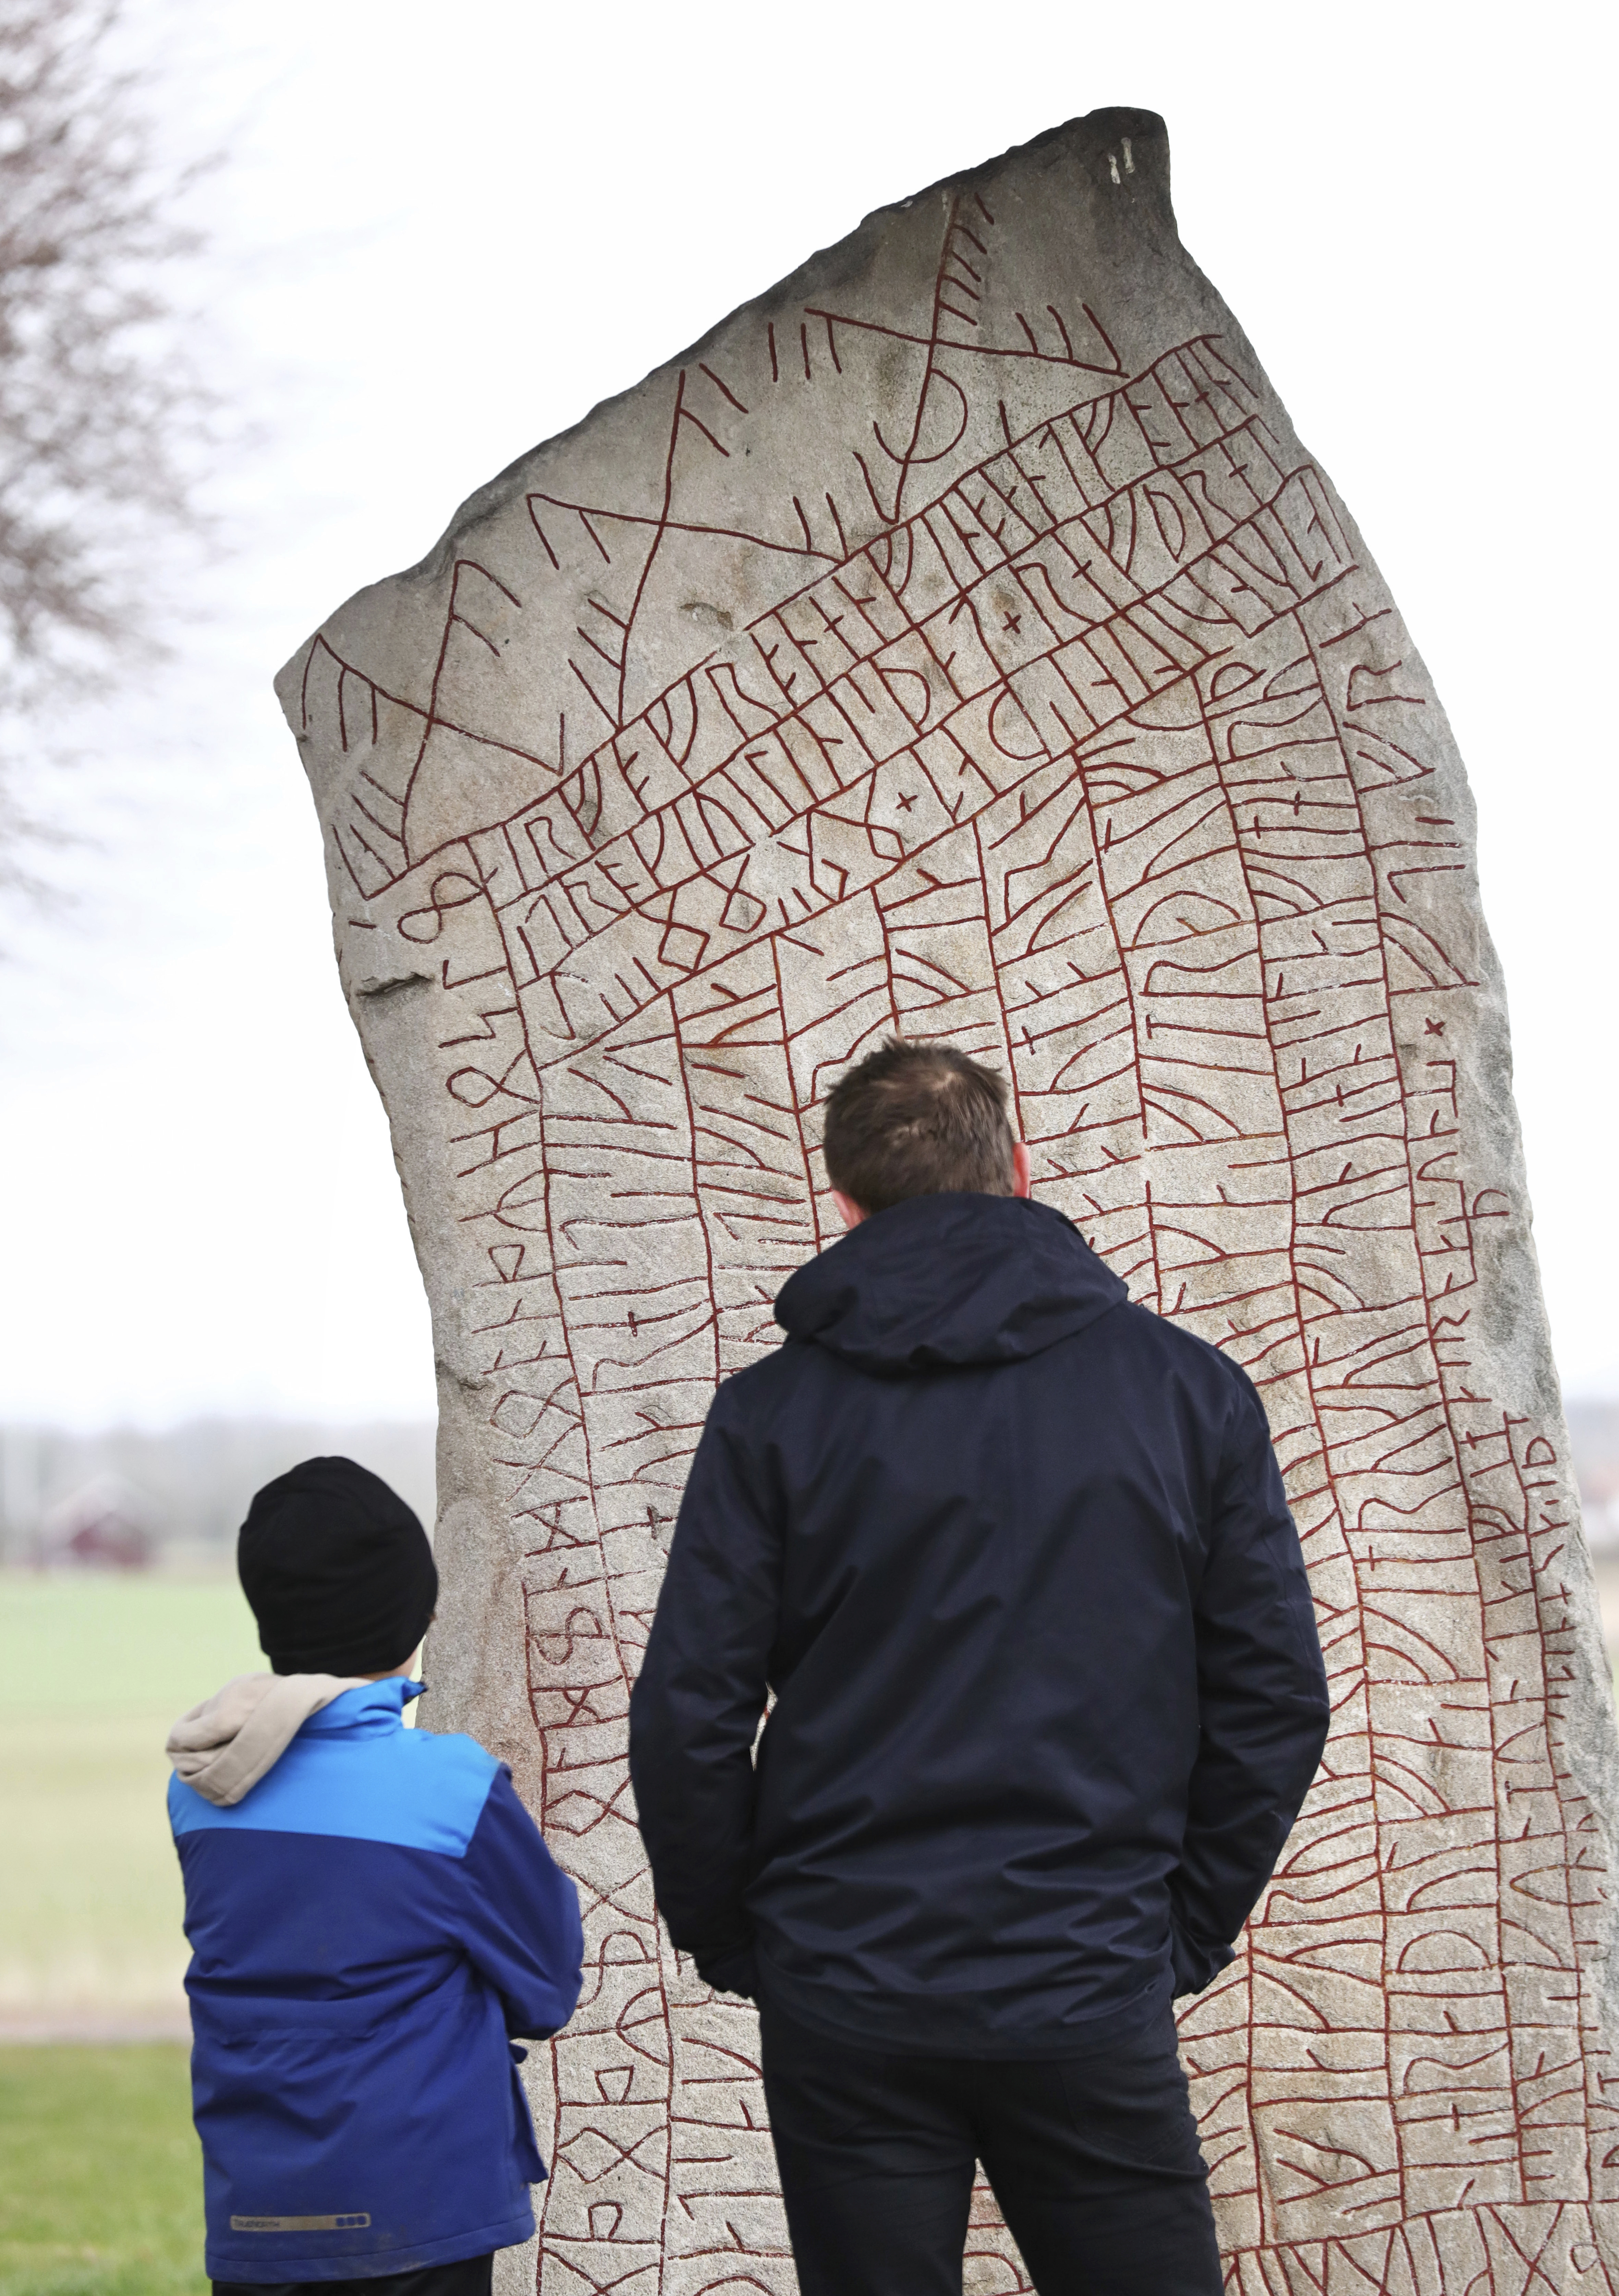 A father and son look at a Viking-era runic stone near Lake Vattern and the town of Odeshog, Sweden